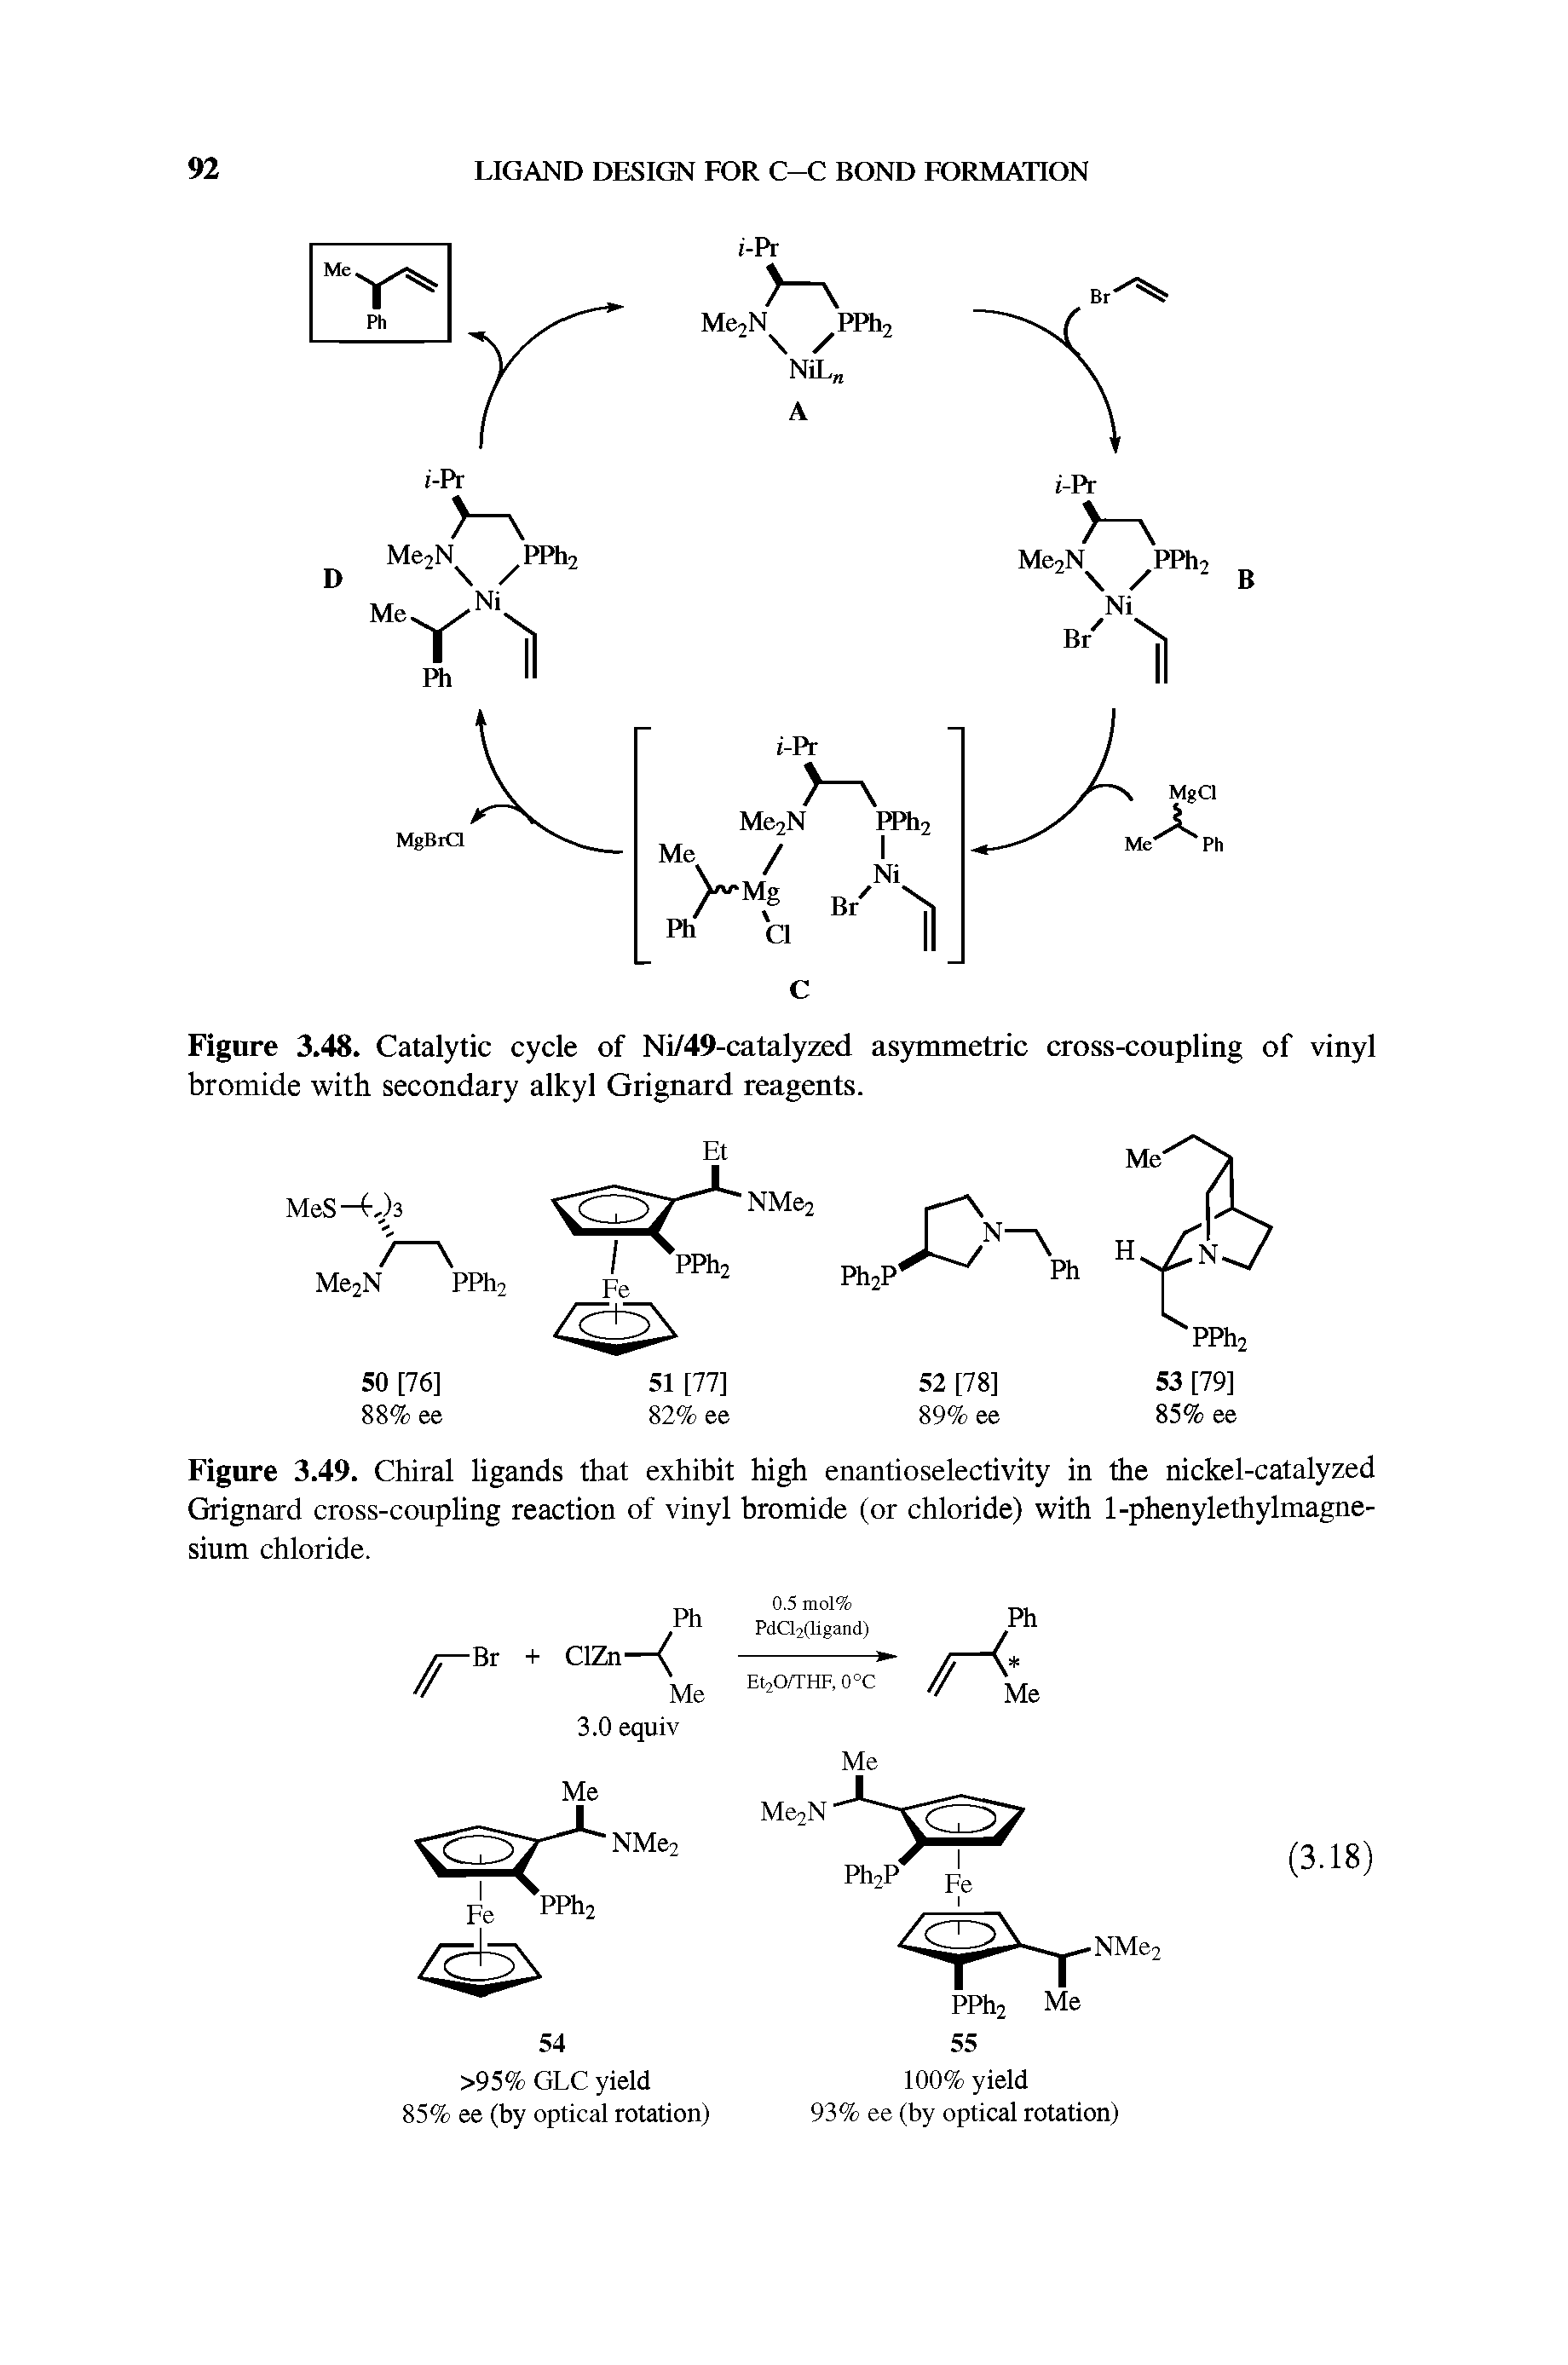 Figure 3.49. Chiral ligands that exhibit high enantioselectivity in the nickel-catalyzed Grignard cross-coupling reaction of vinyl bromide (or chloride) with 1-phenylethylmagne-sium chloride.